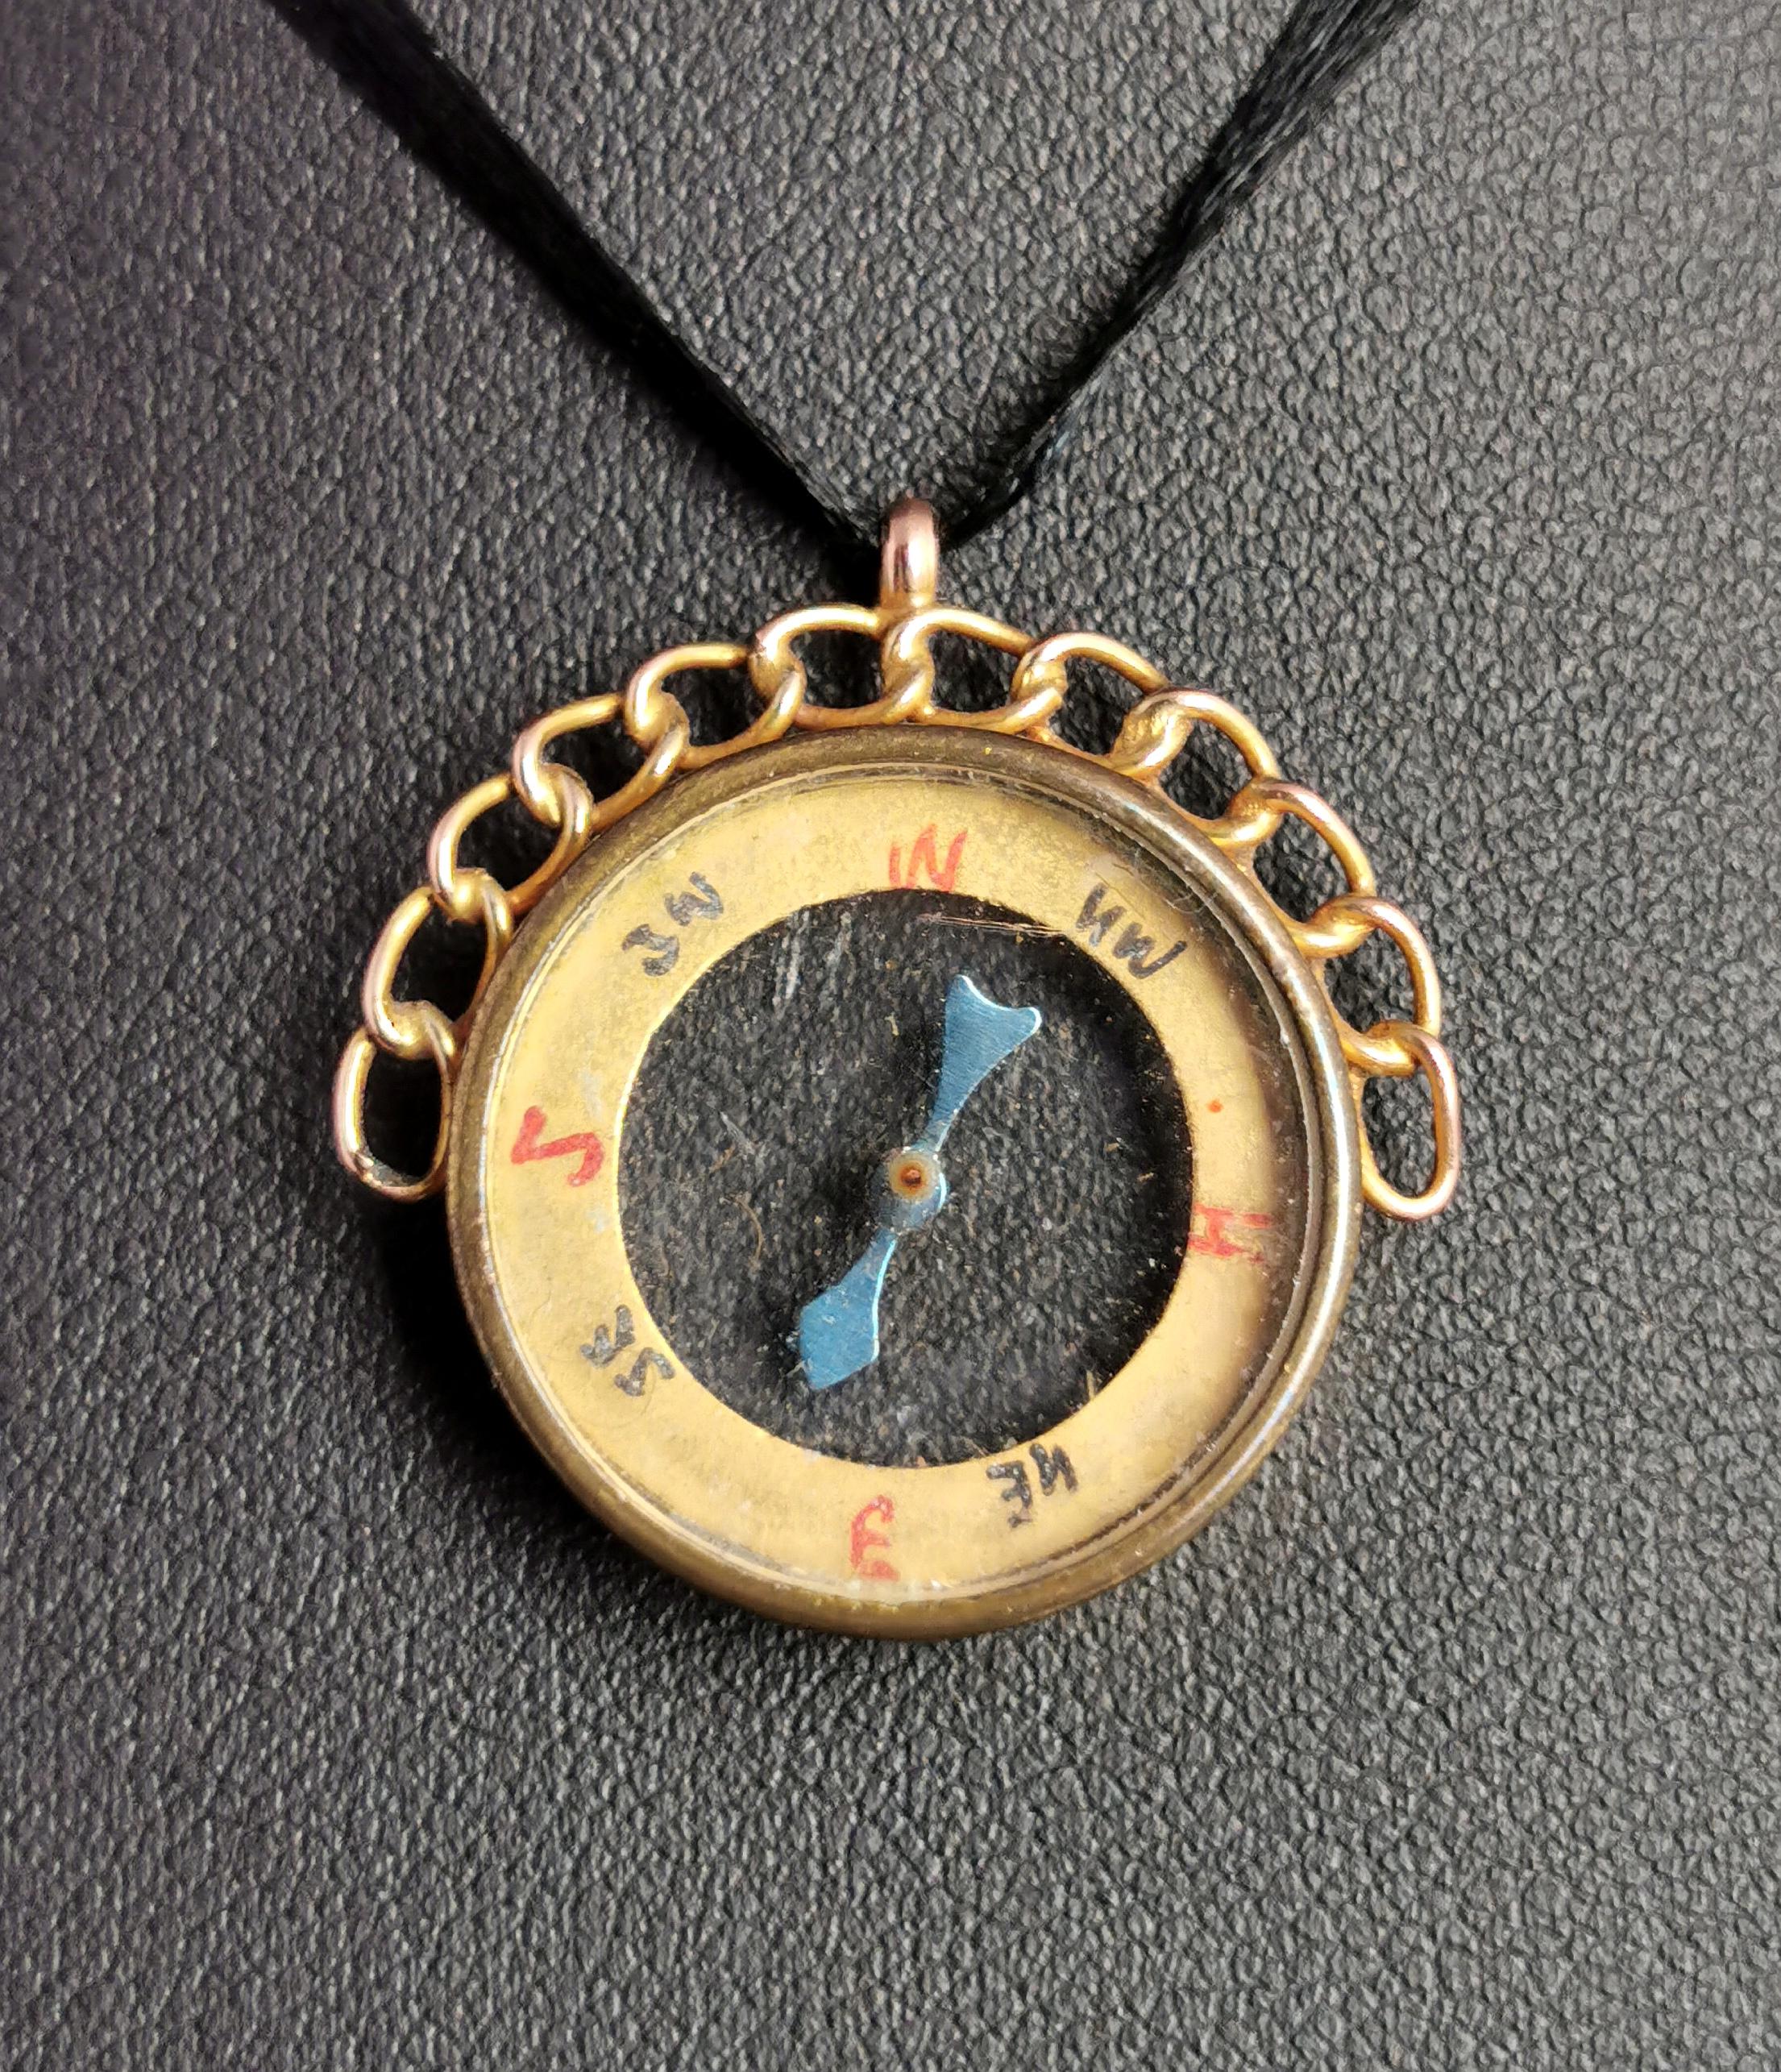 A beautiful antique 9kt gold compass pendant or fob.

It has a whimsical and mystical feel to it with the real working compass encased within the original glass.

The compass appears to be in working order though I can't guarantee it's accuracy, it